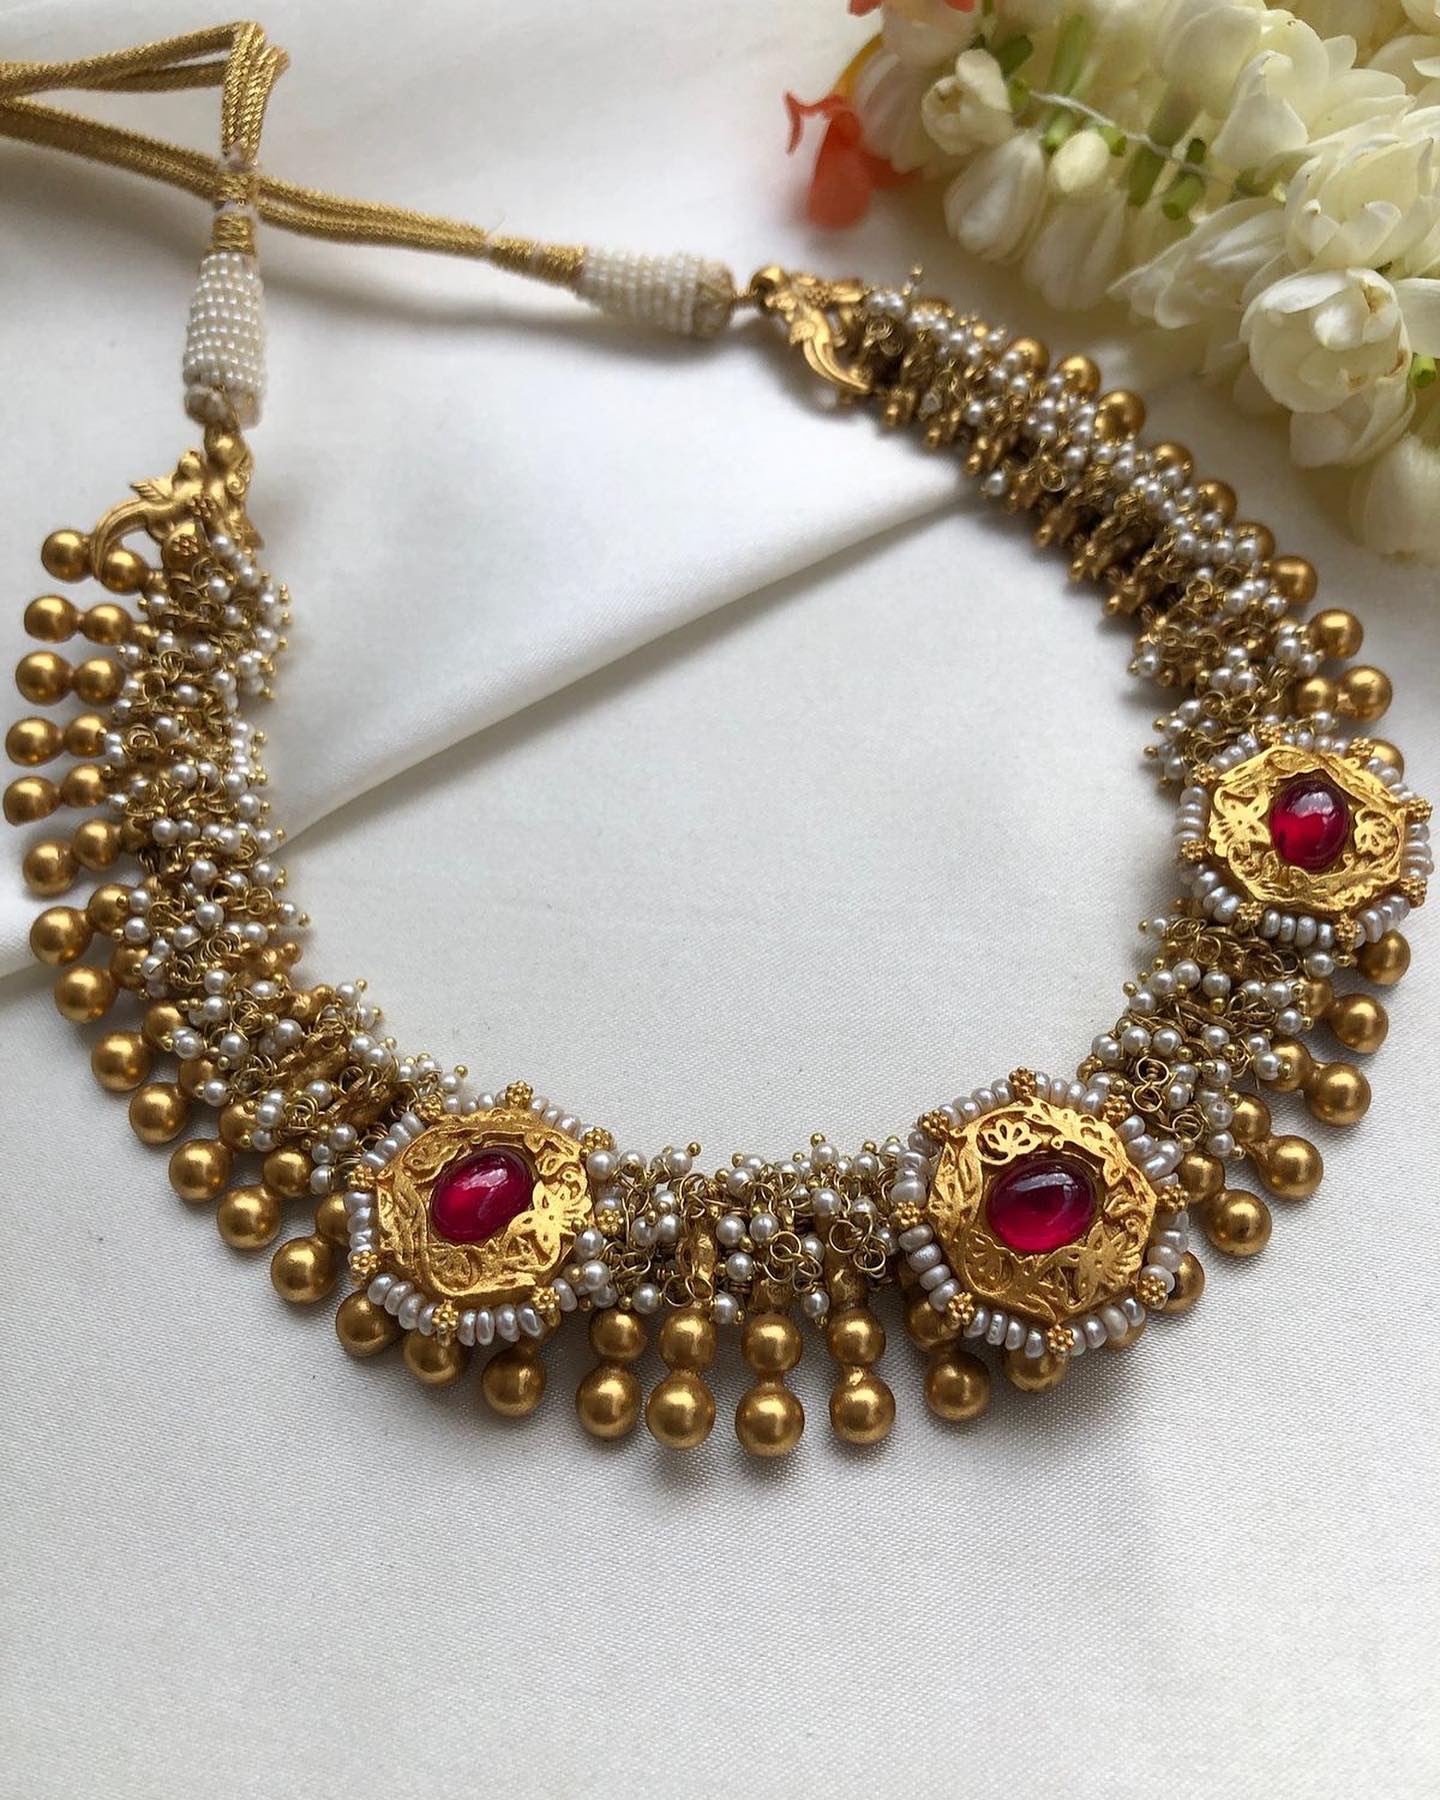 Gold Plated 92.5 Silver Necksets From 'House of Taamara' 